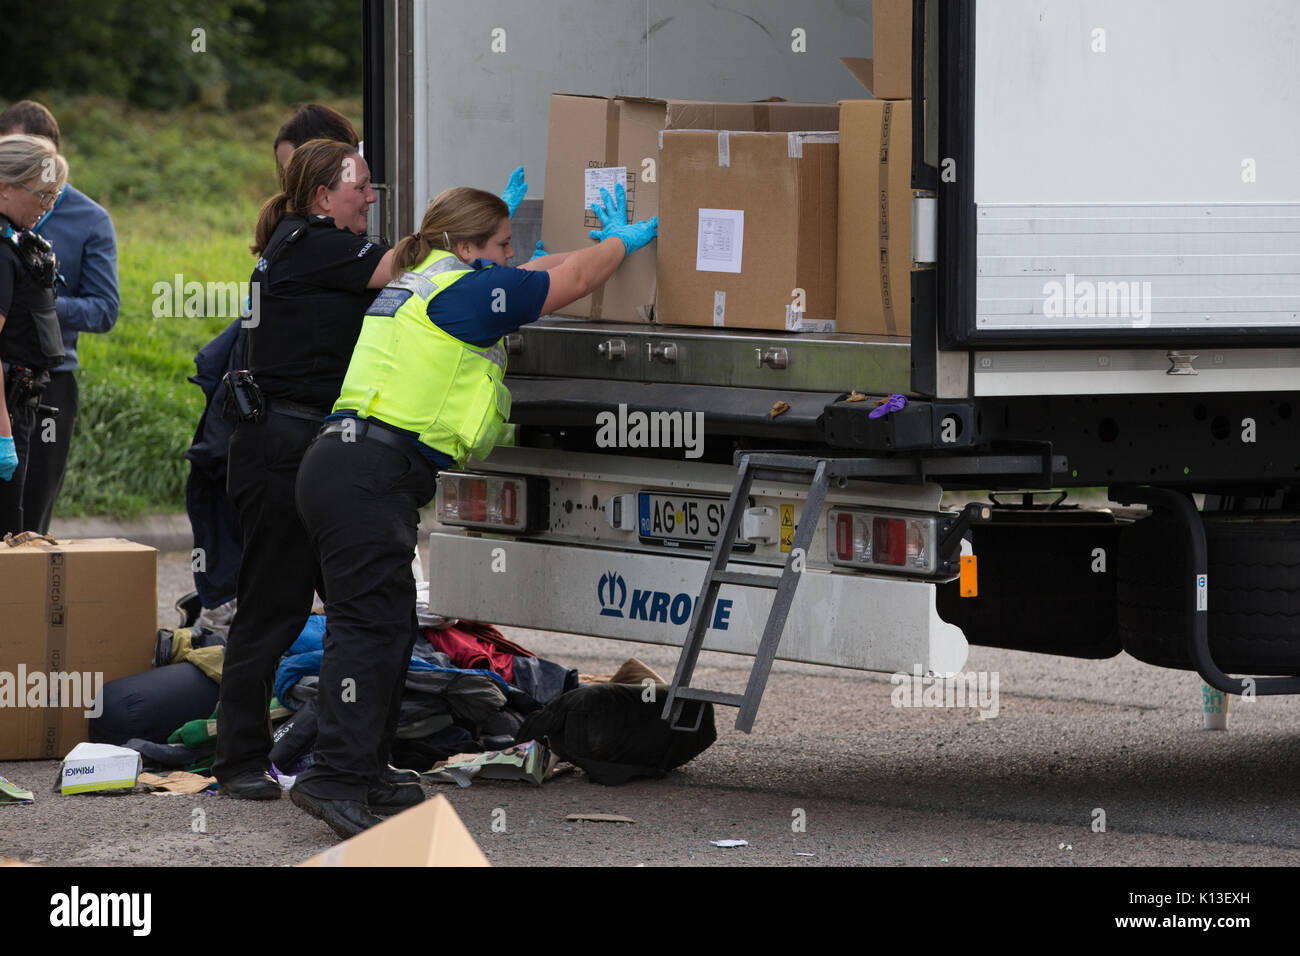 Police officers and search teams go through boxes found in a lorry where 13 men and boys, including a 15-year-old, were discovered, at the Mangrove Service Station, on the A45 London Road, in Rugby, Warwickshire. Stock Photo